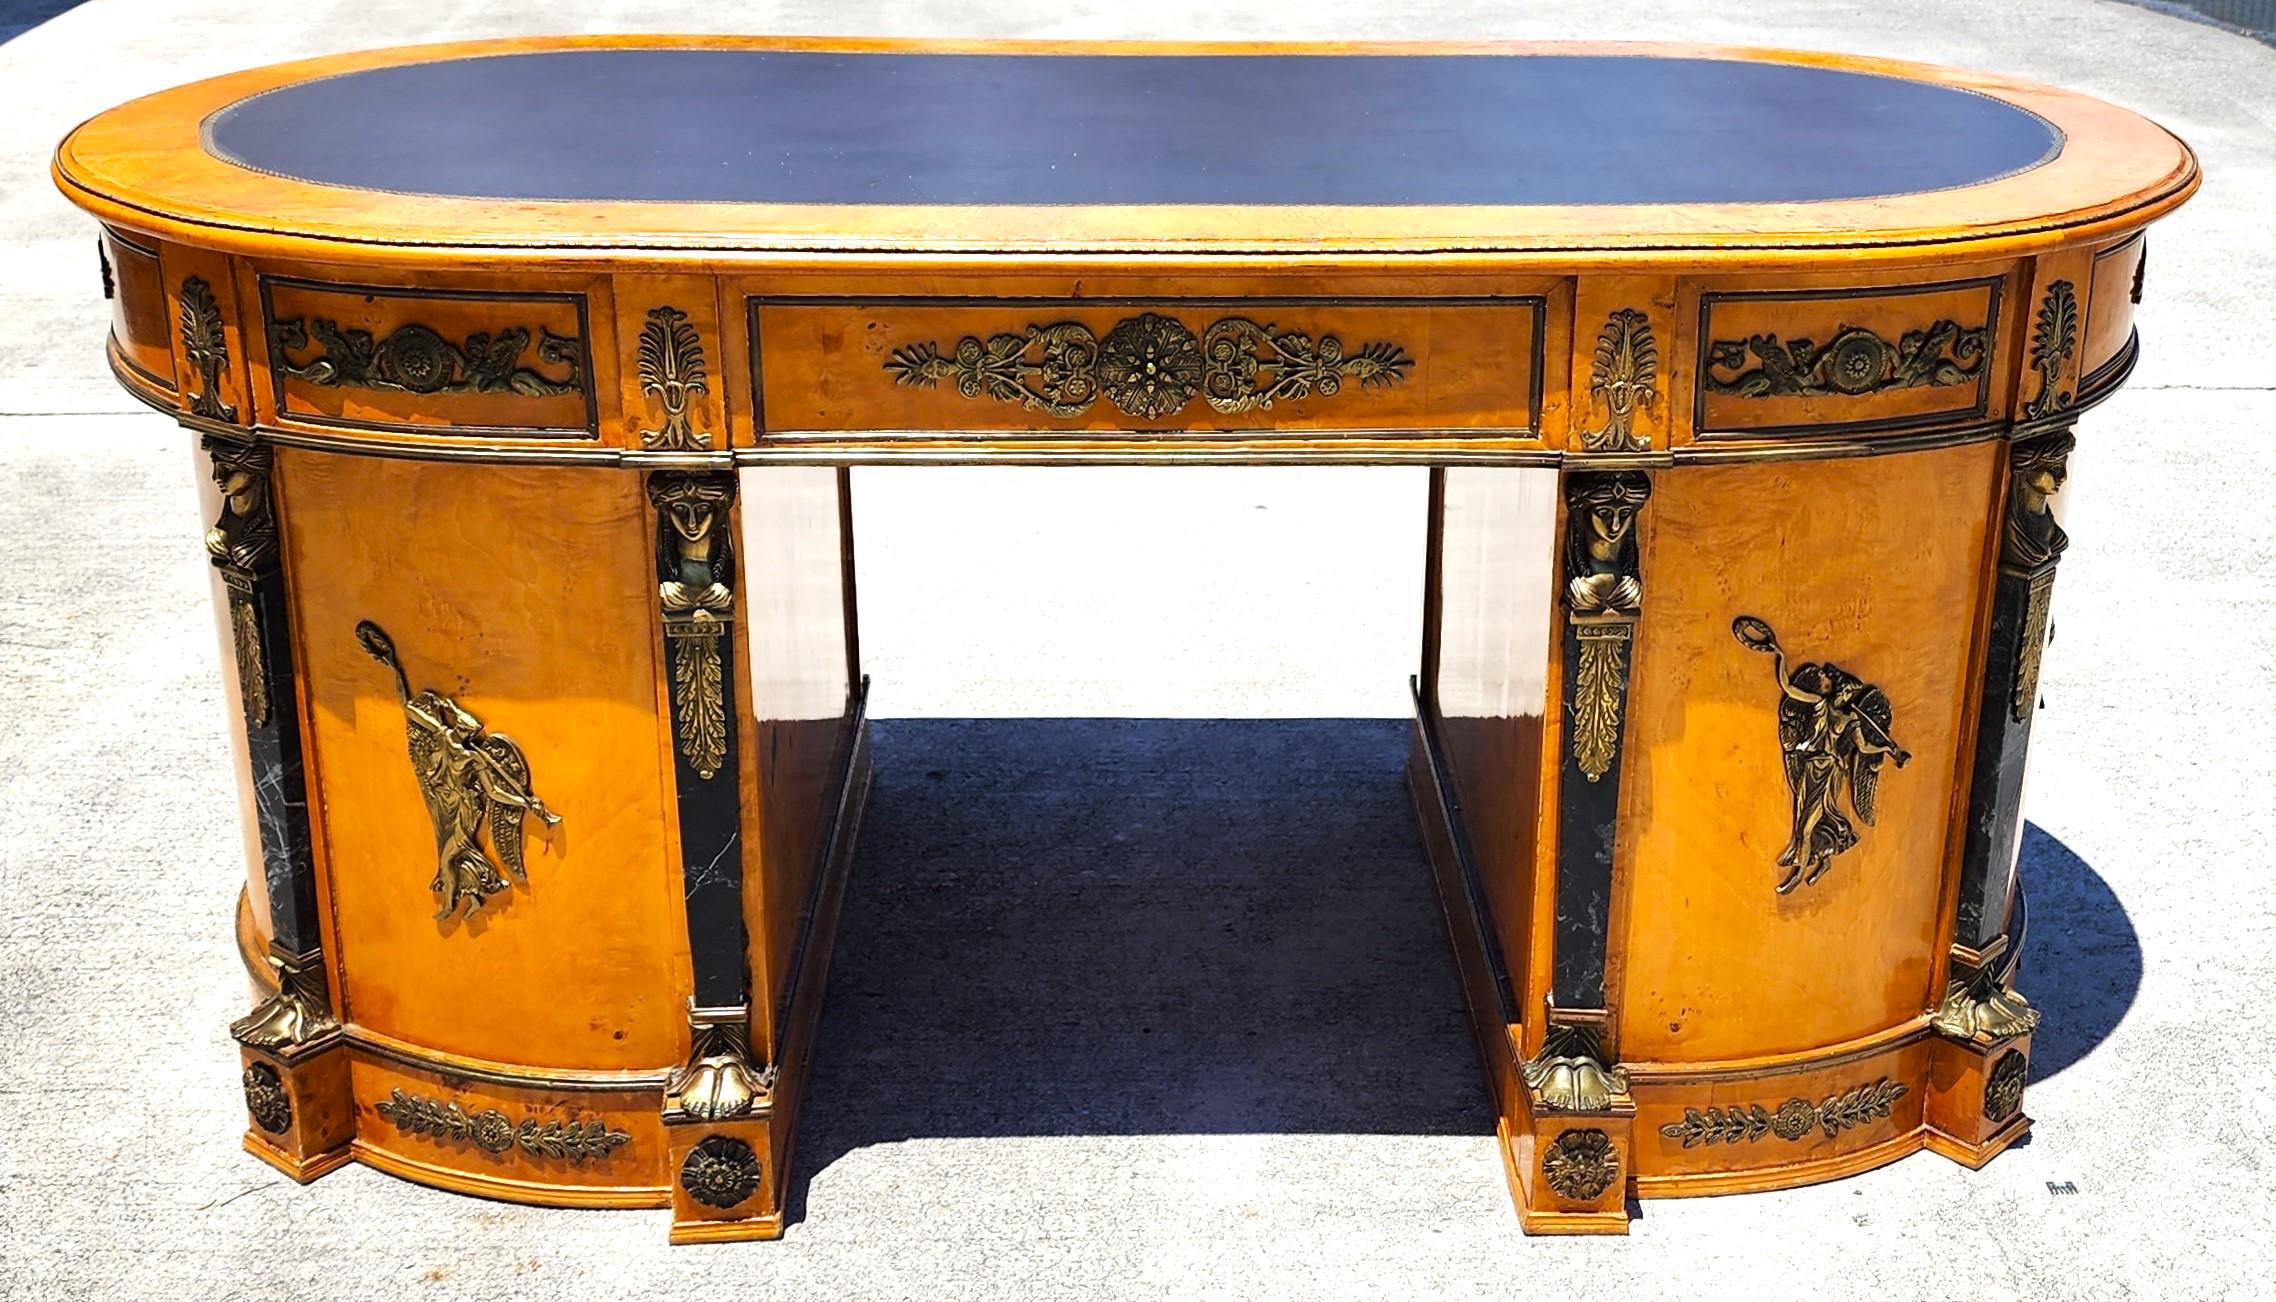 For FULL item description click on CONTINUE READING at the bottom of this page.

Offering One Of Our Recent Palm Beach Estate Fine Furniture Acquisitions Of A
French Louis XV Style Partners Desk with Bronze Ormolu Mounts and Birdseye Maple Finish